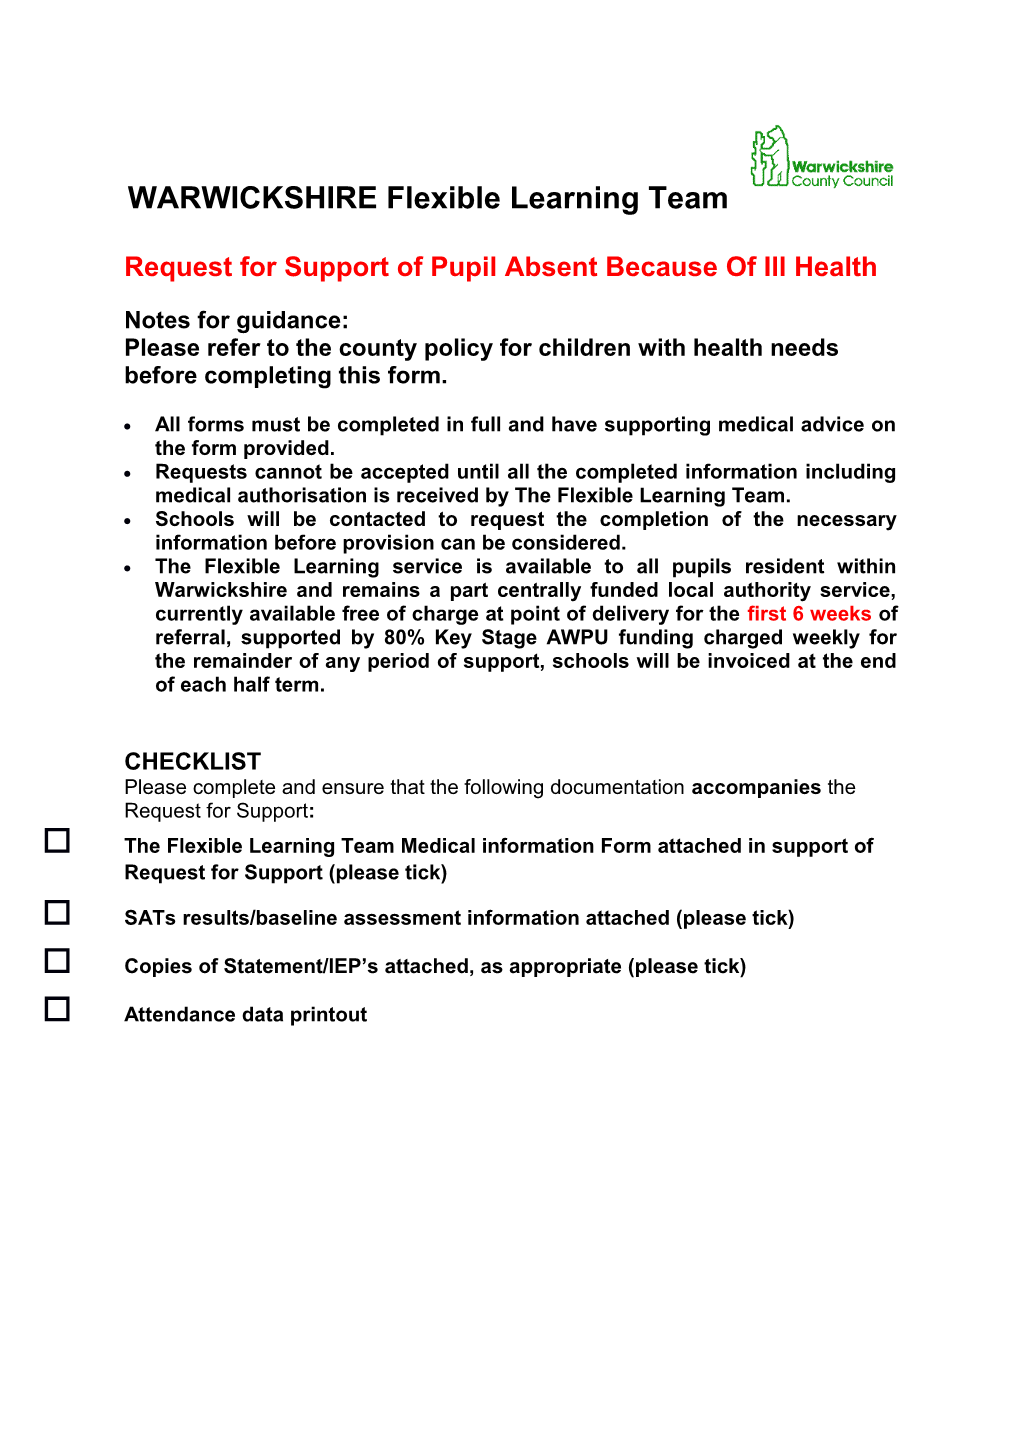 Request for Support of Pupil Absent Because of Ill Health